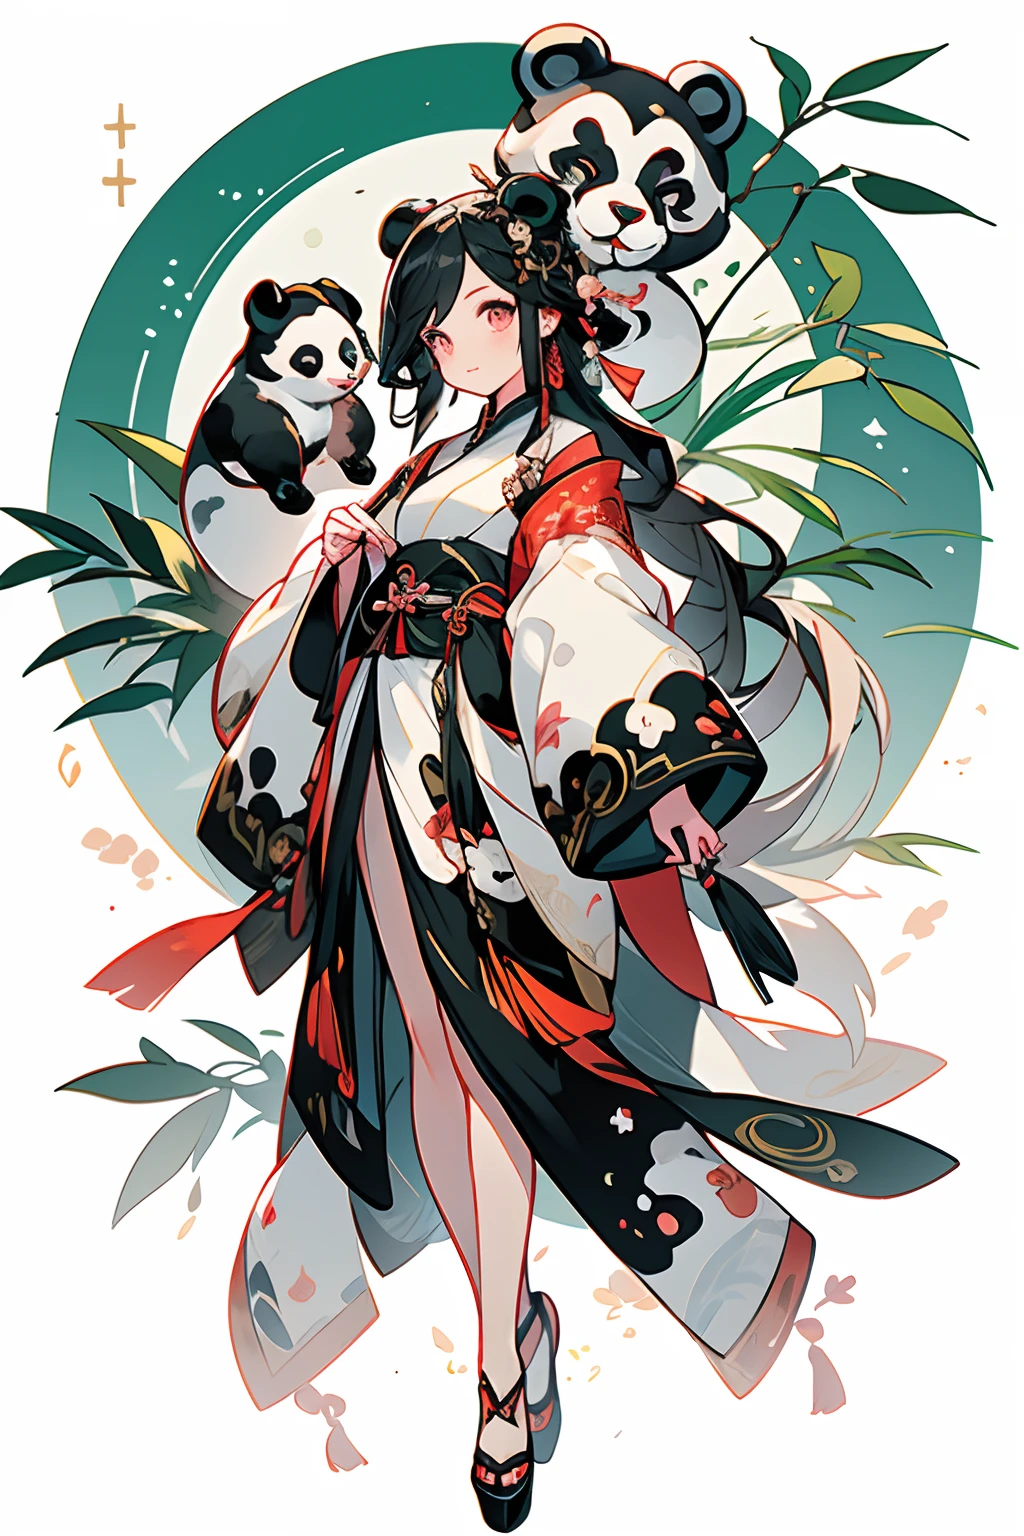 white backgrounid，Under bamboo leaves, (The panda sits on a branch)，pandas，（1Blittle girl：1.5，The upper part of the body，looking at viewert），Pink and white clothes，facial closeups，big beatiful eyes，detailed face with，Flashy clothes，Ethereal panda，(Chinese Panda)，Dreamy，Onmyoji detailed art，A beautiful artwork illustration，mythological creatures，pandas，Beautiful digital artwork，shoes，Footwear, China_dress,